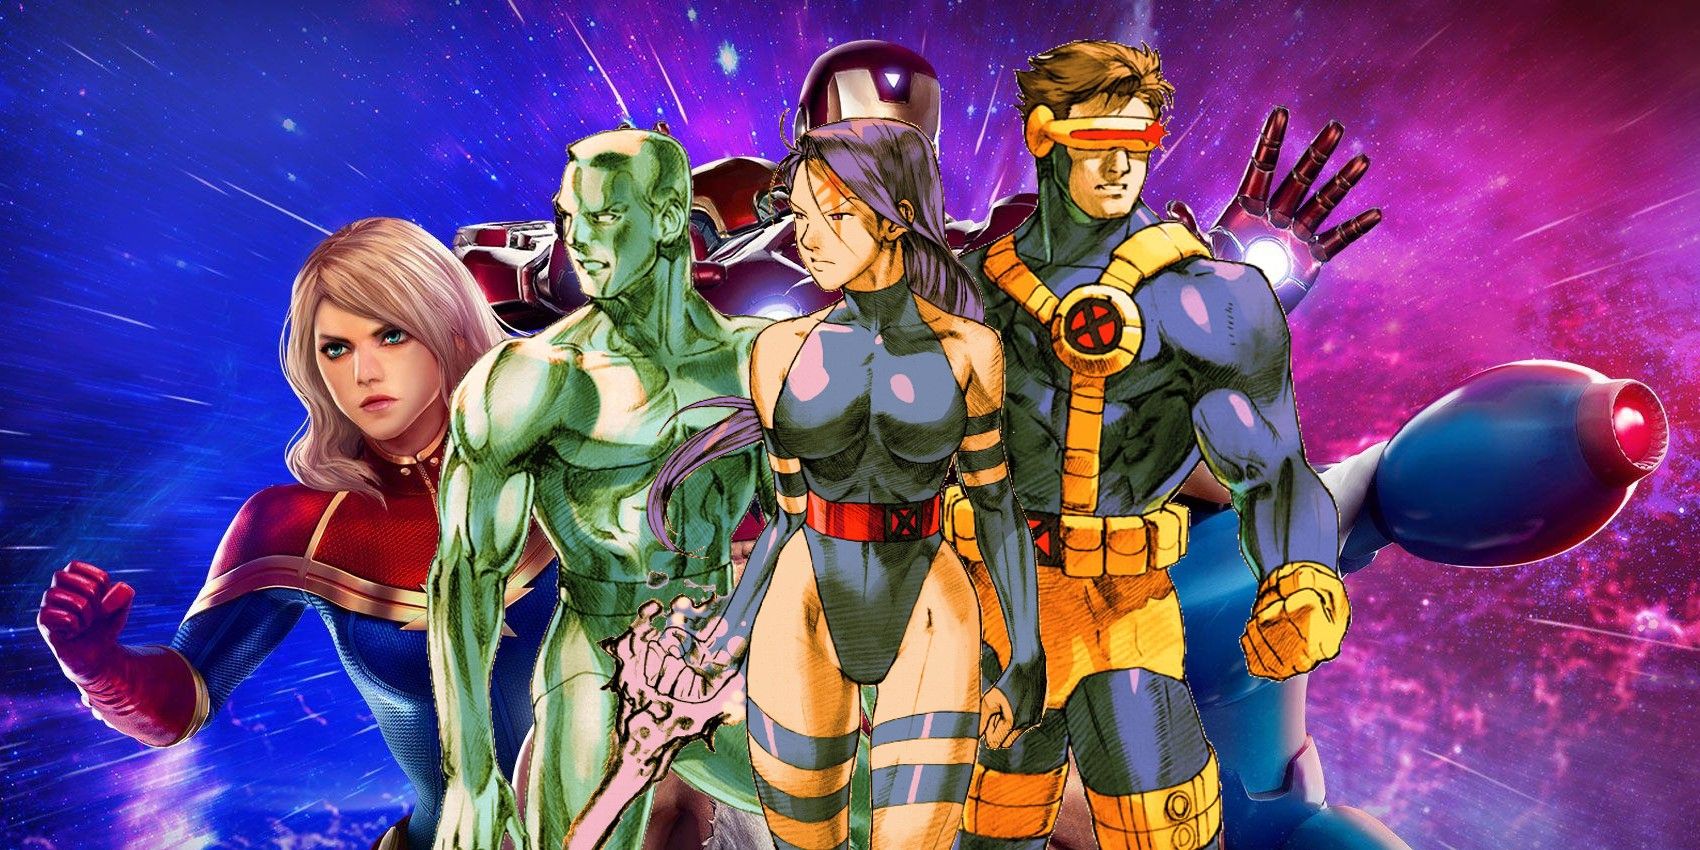 Marvel vs Capcom 5 can bring back the X-Men Wolverine Cyclops Kitty Pryde MCU